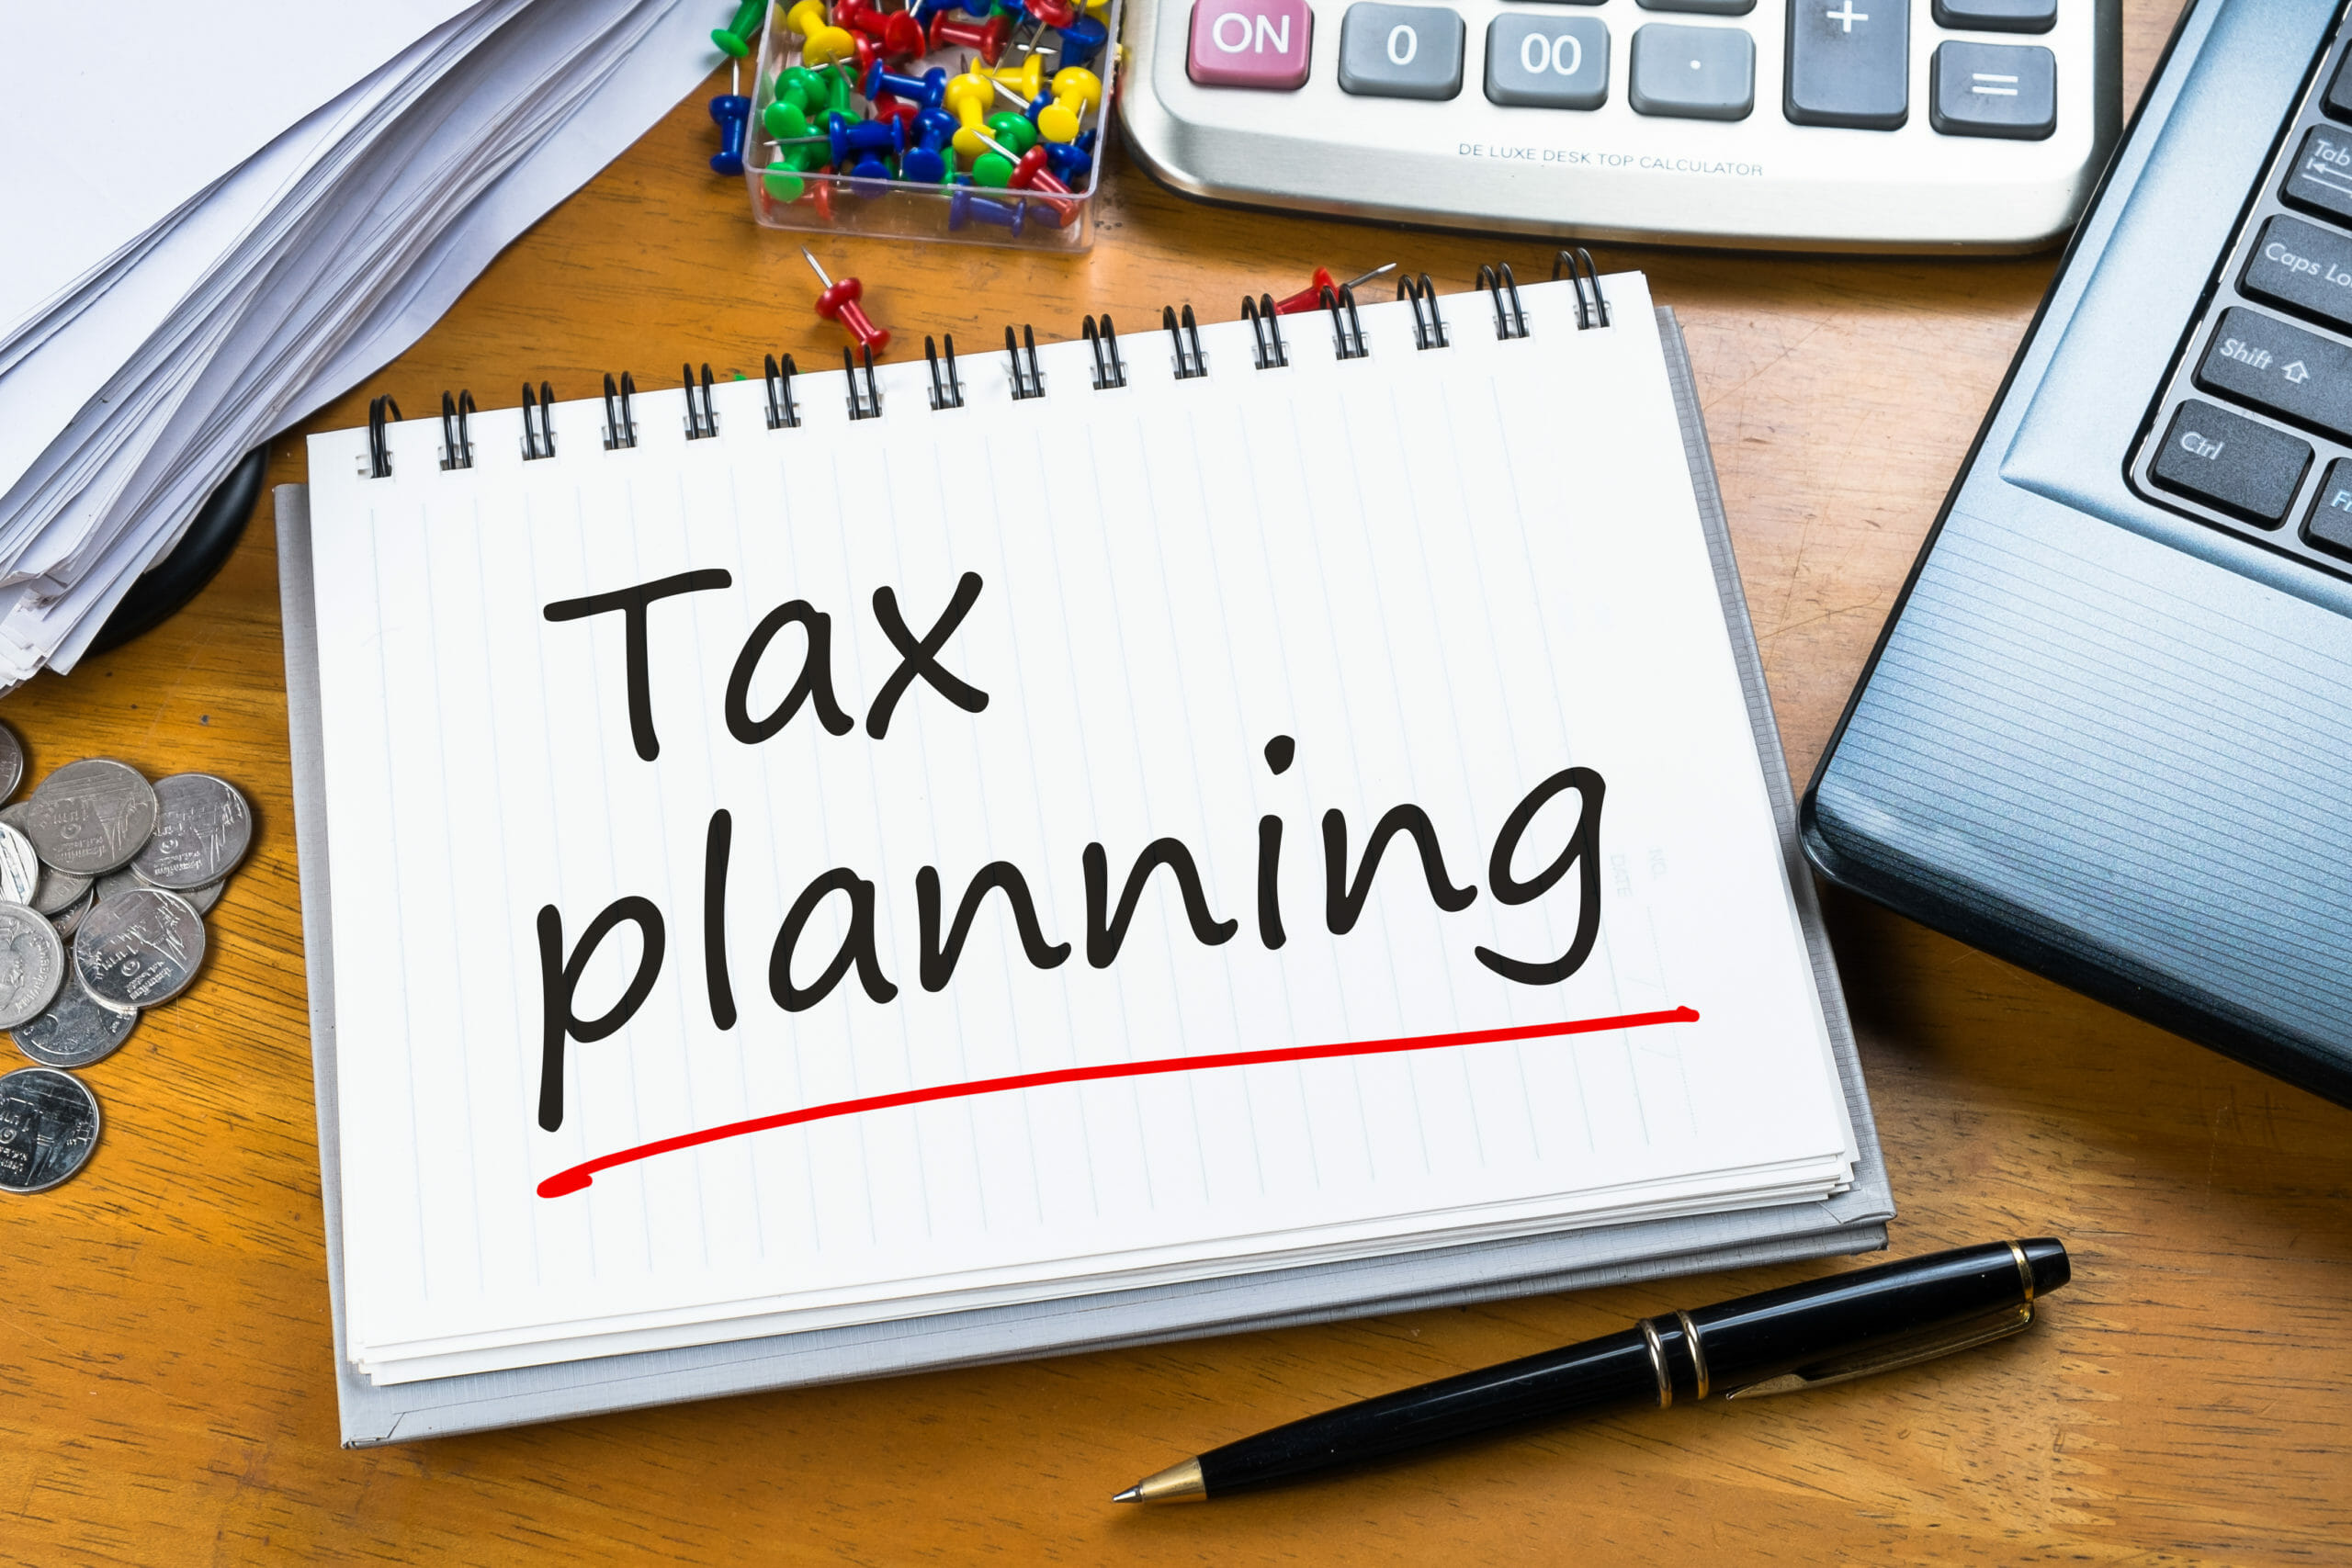 Tax planning offers many benefits to small business owners